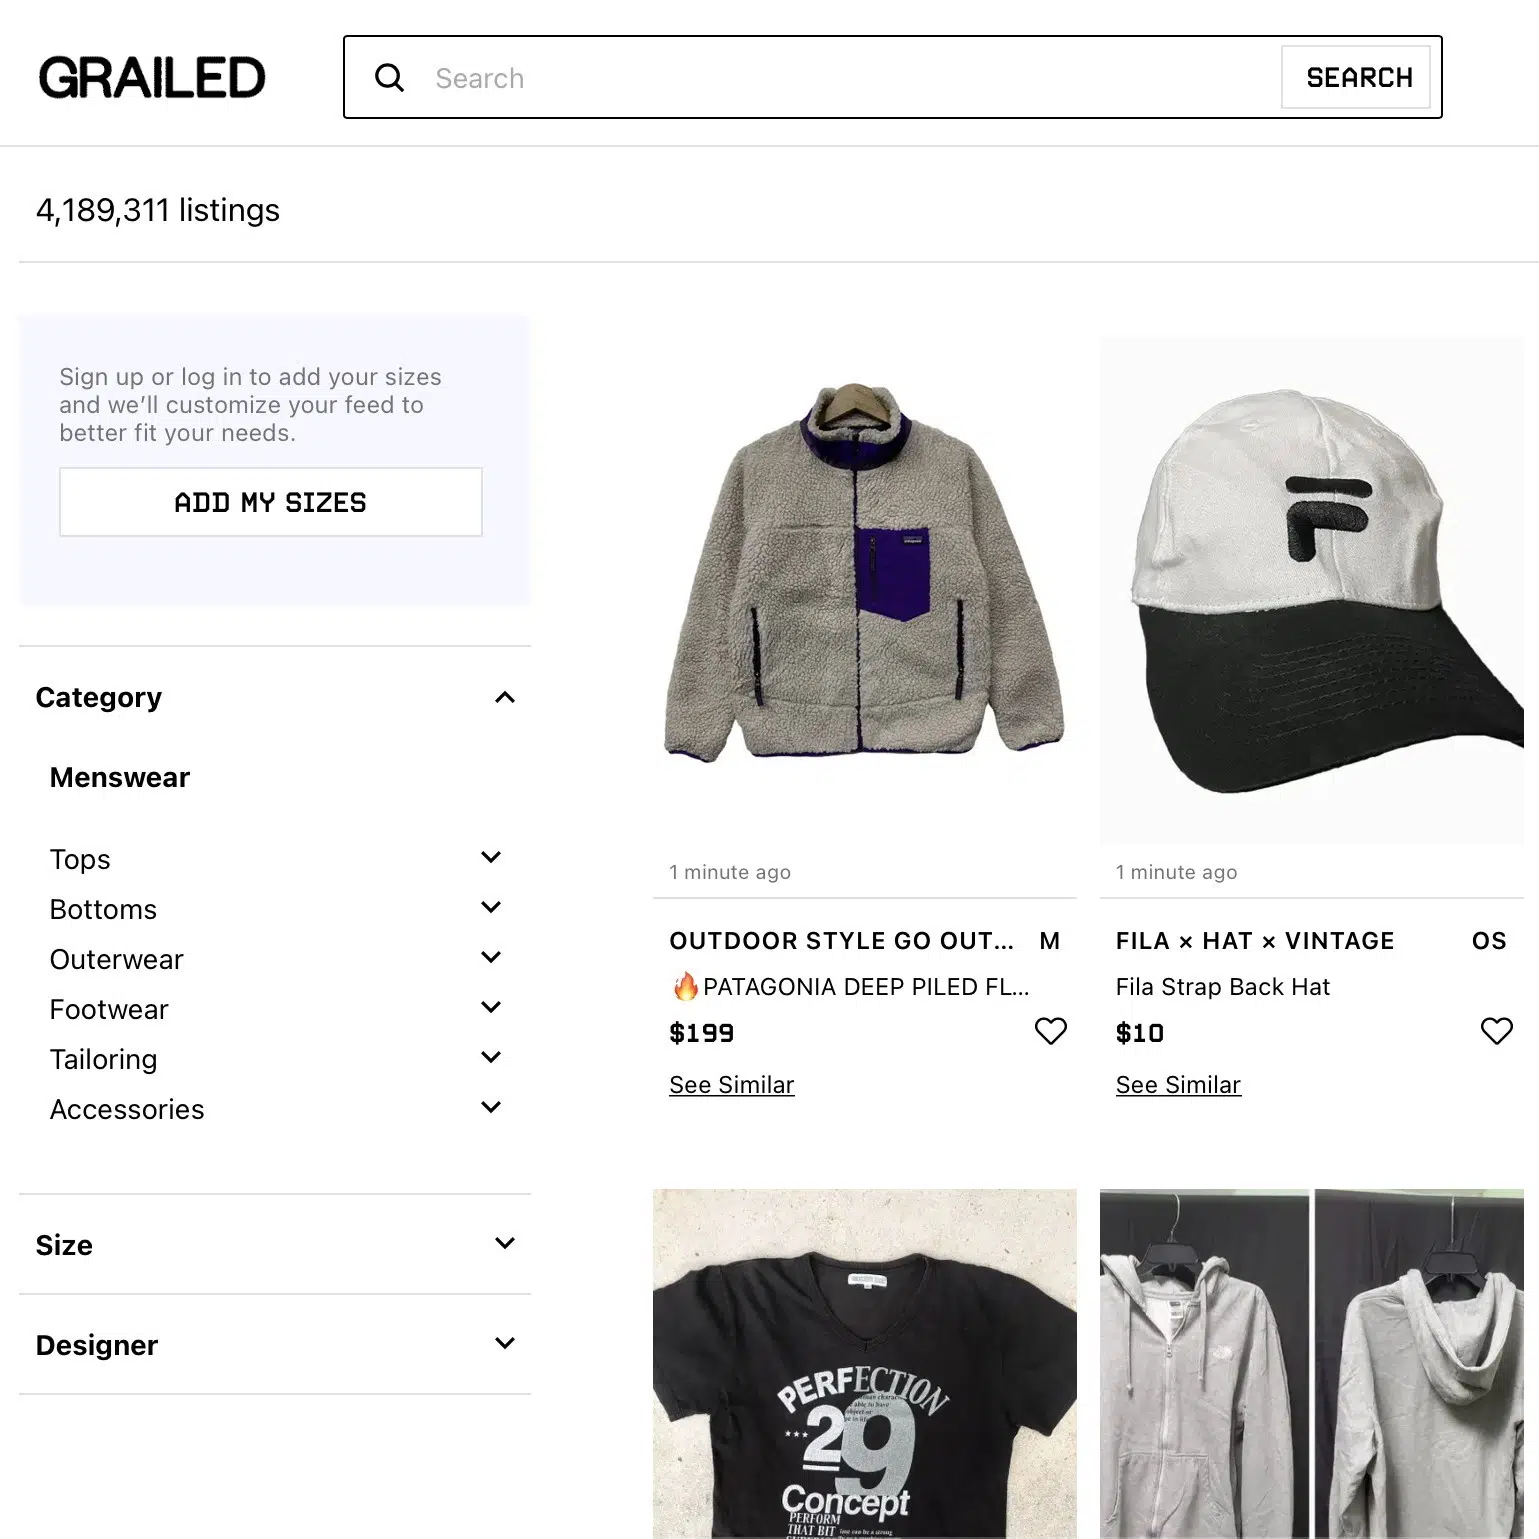 Grailed.com Review: The Truth About This Controversial Site